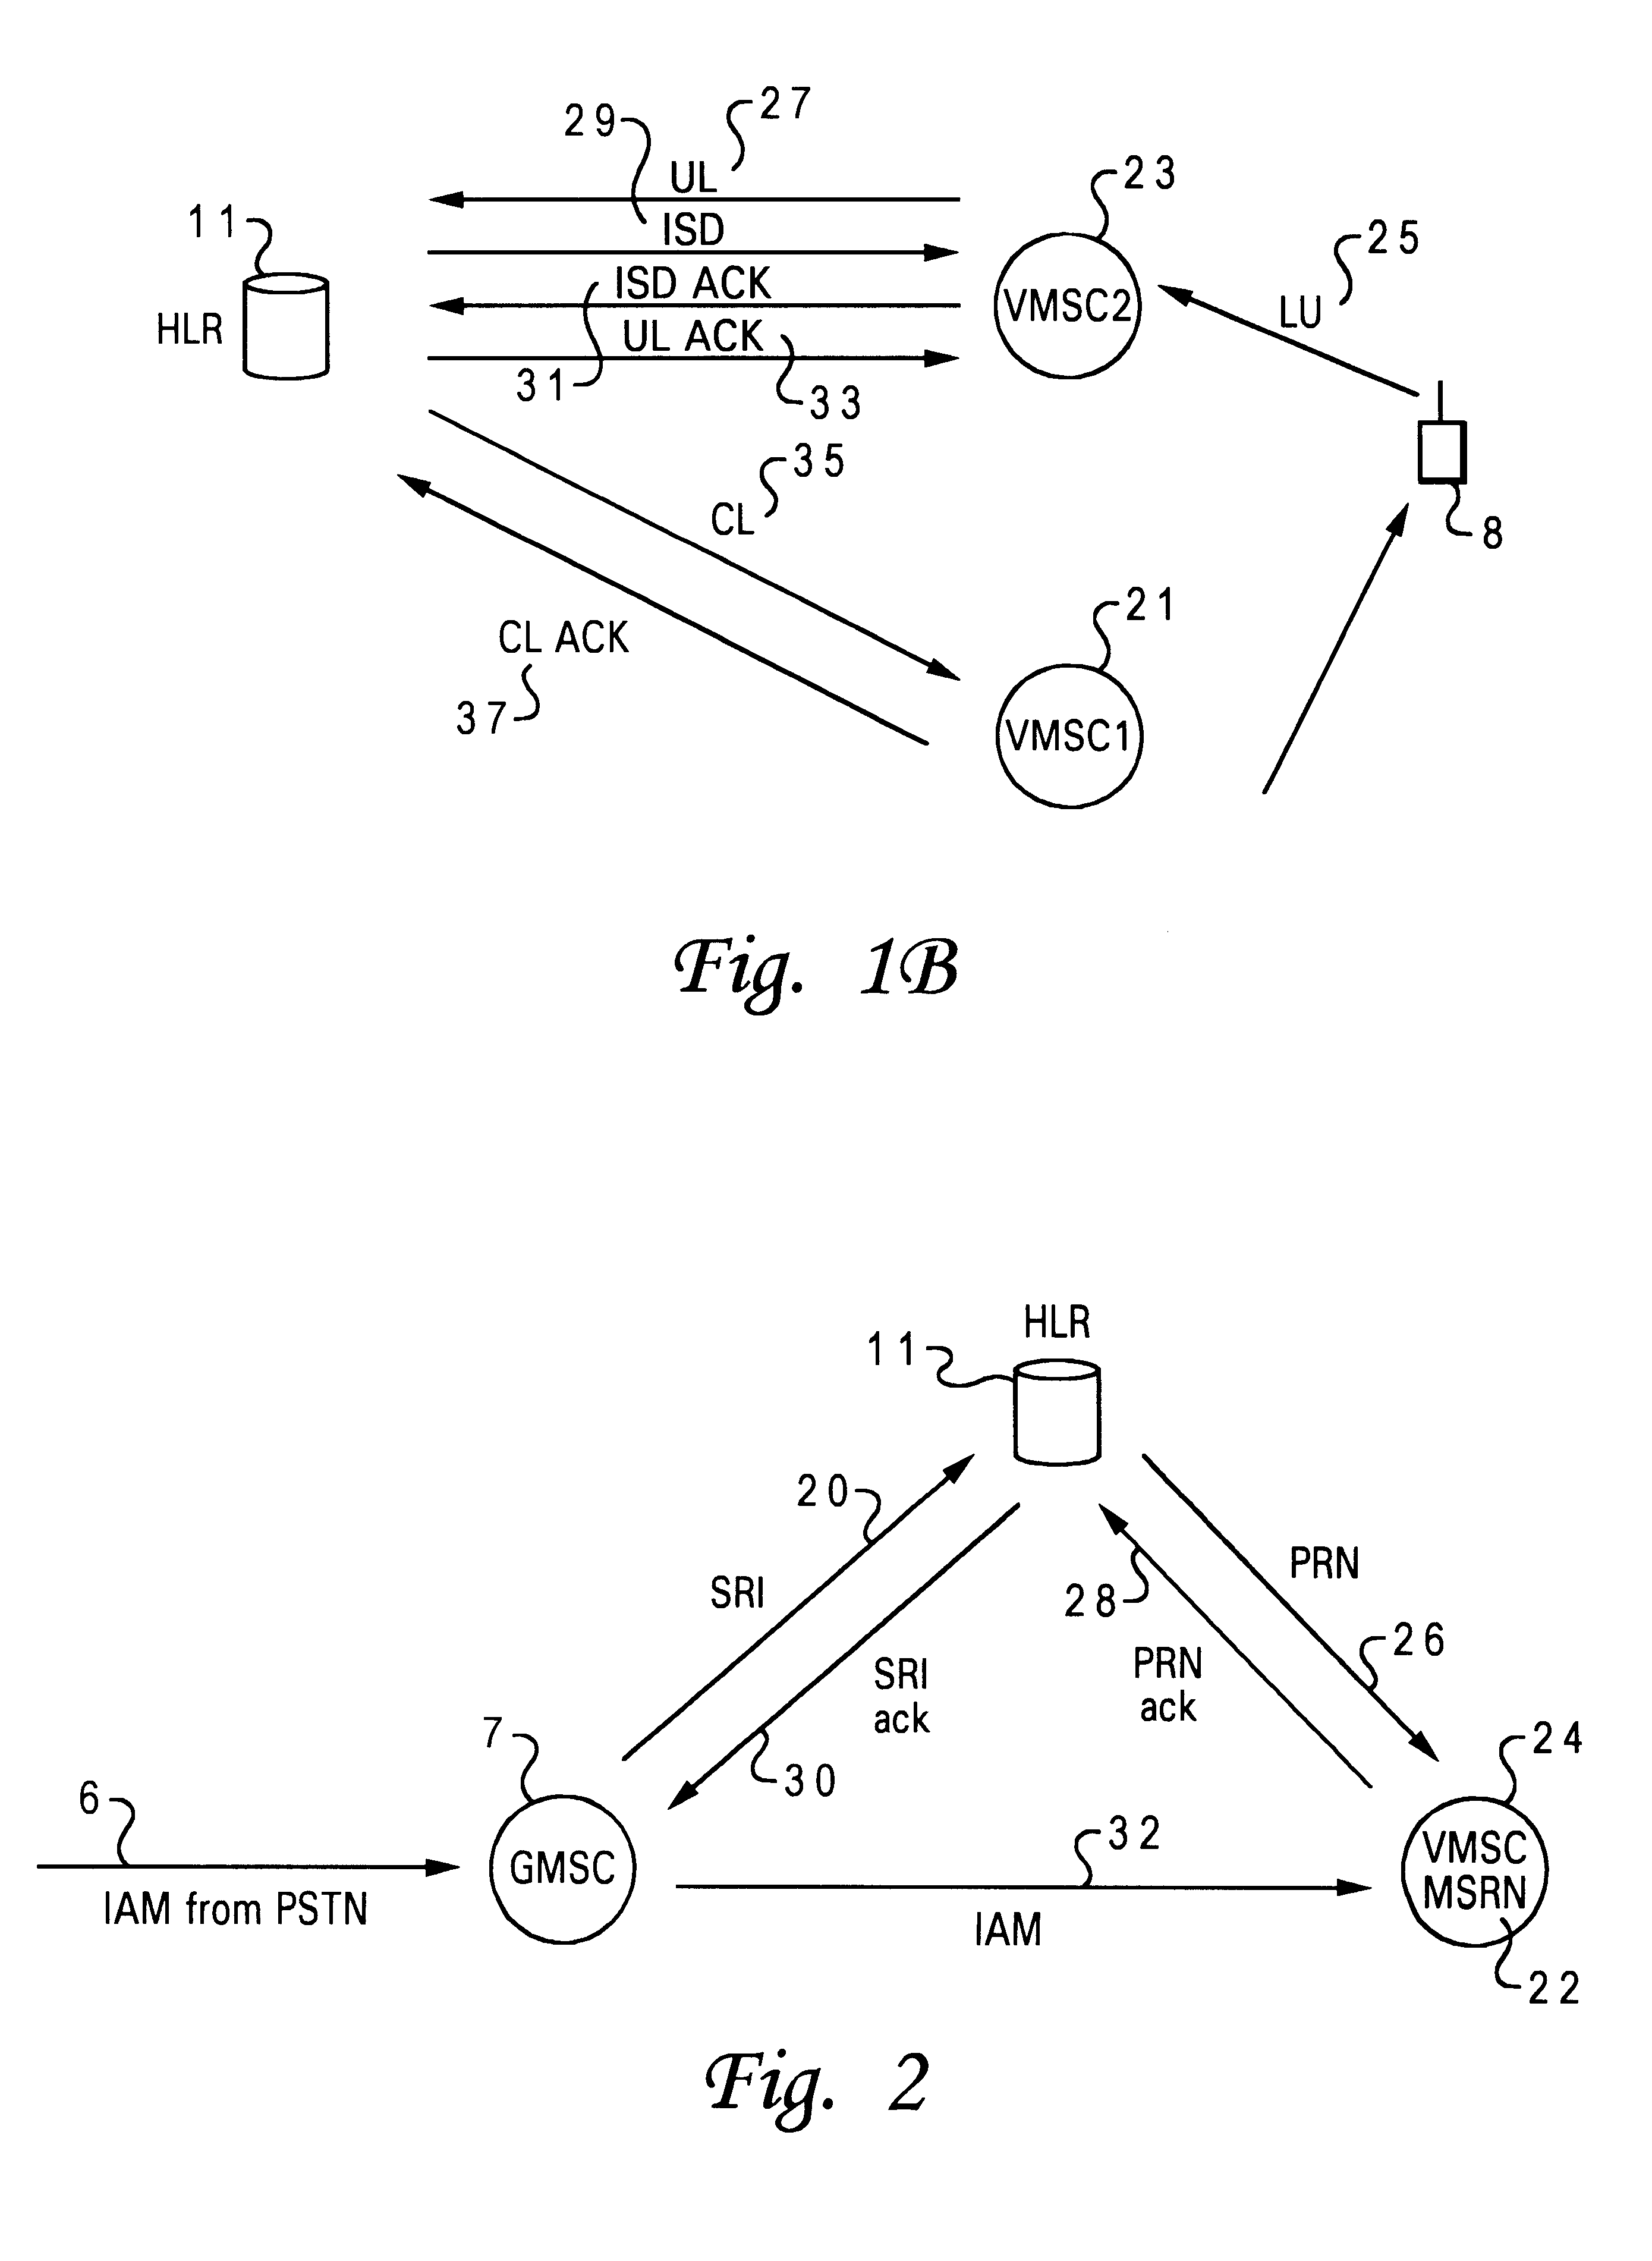 Method and system for reducing call setup by roaming number caching